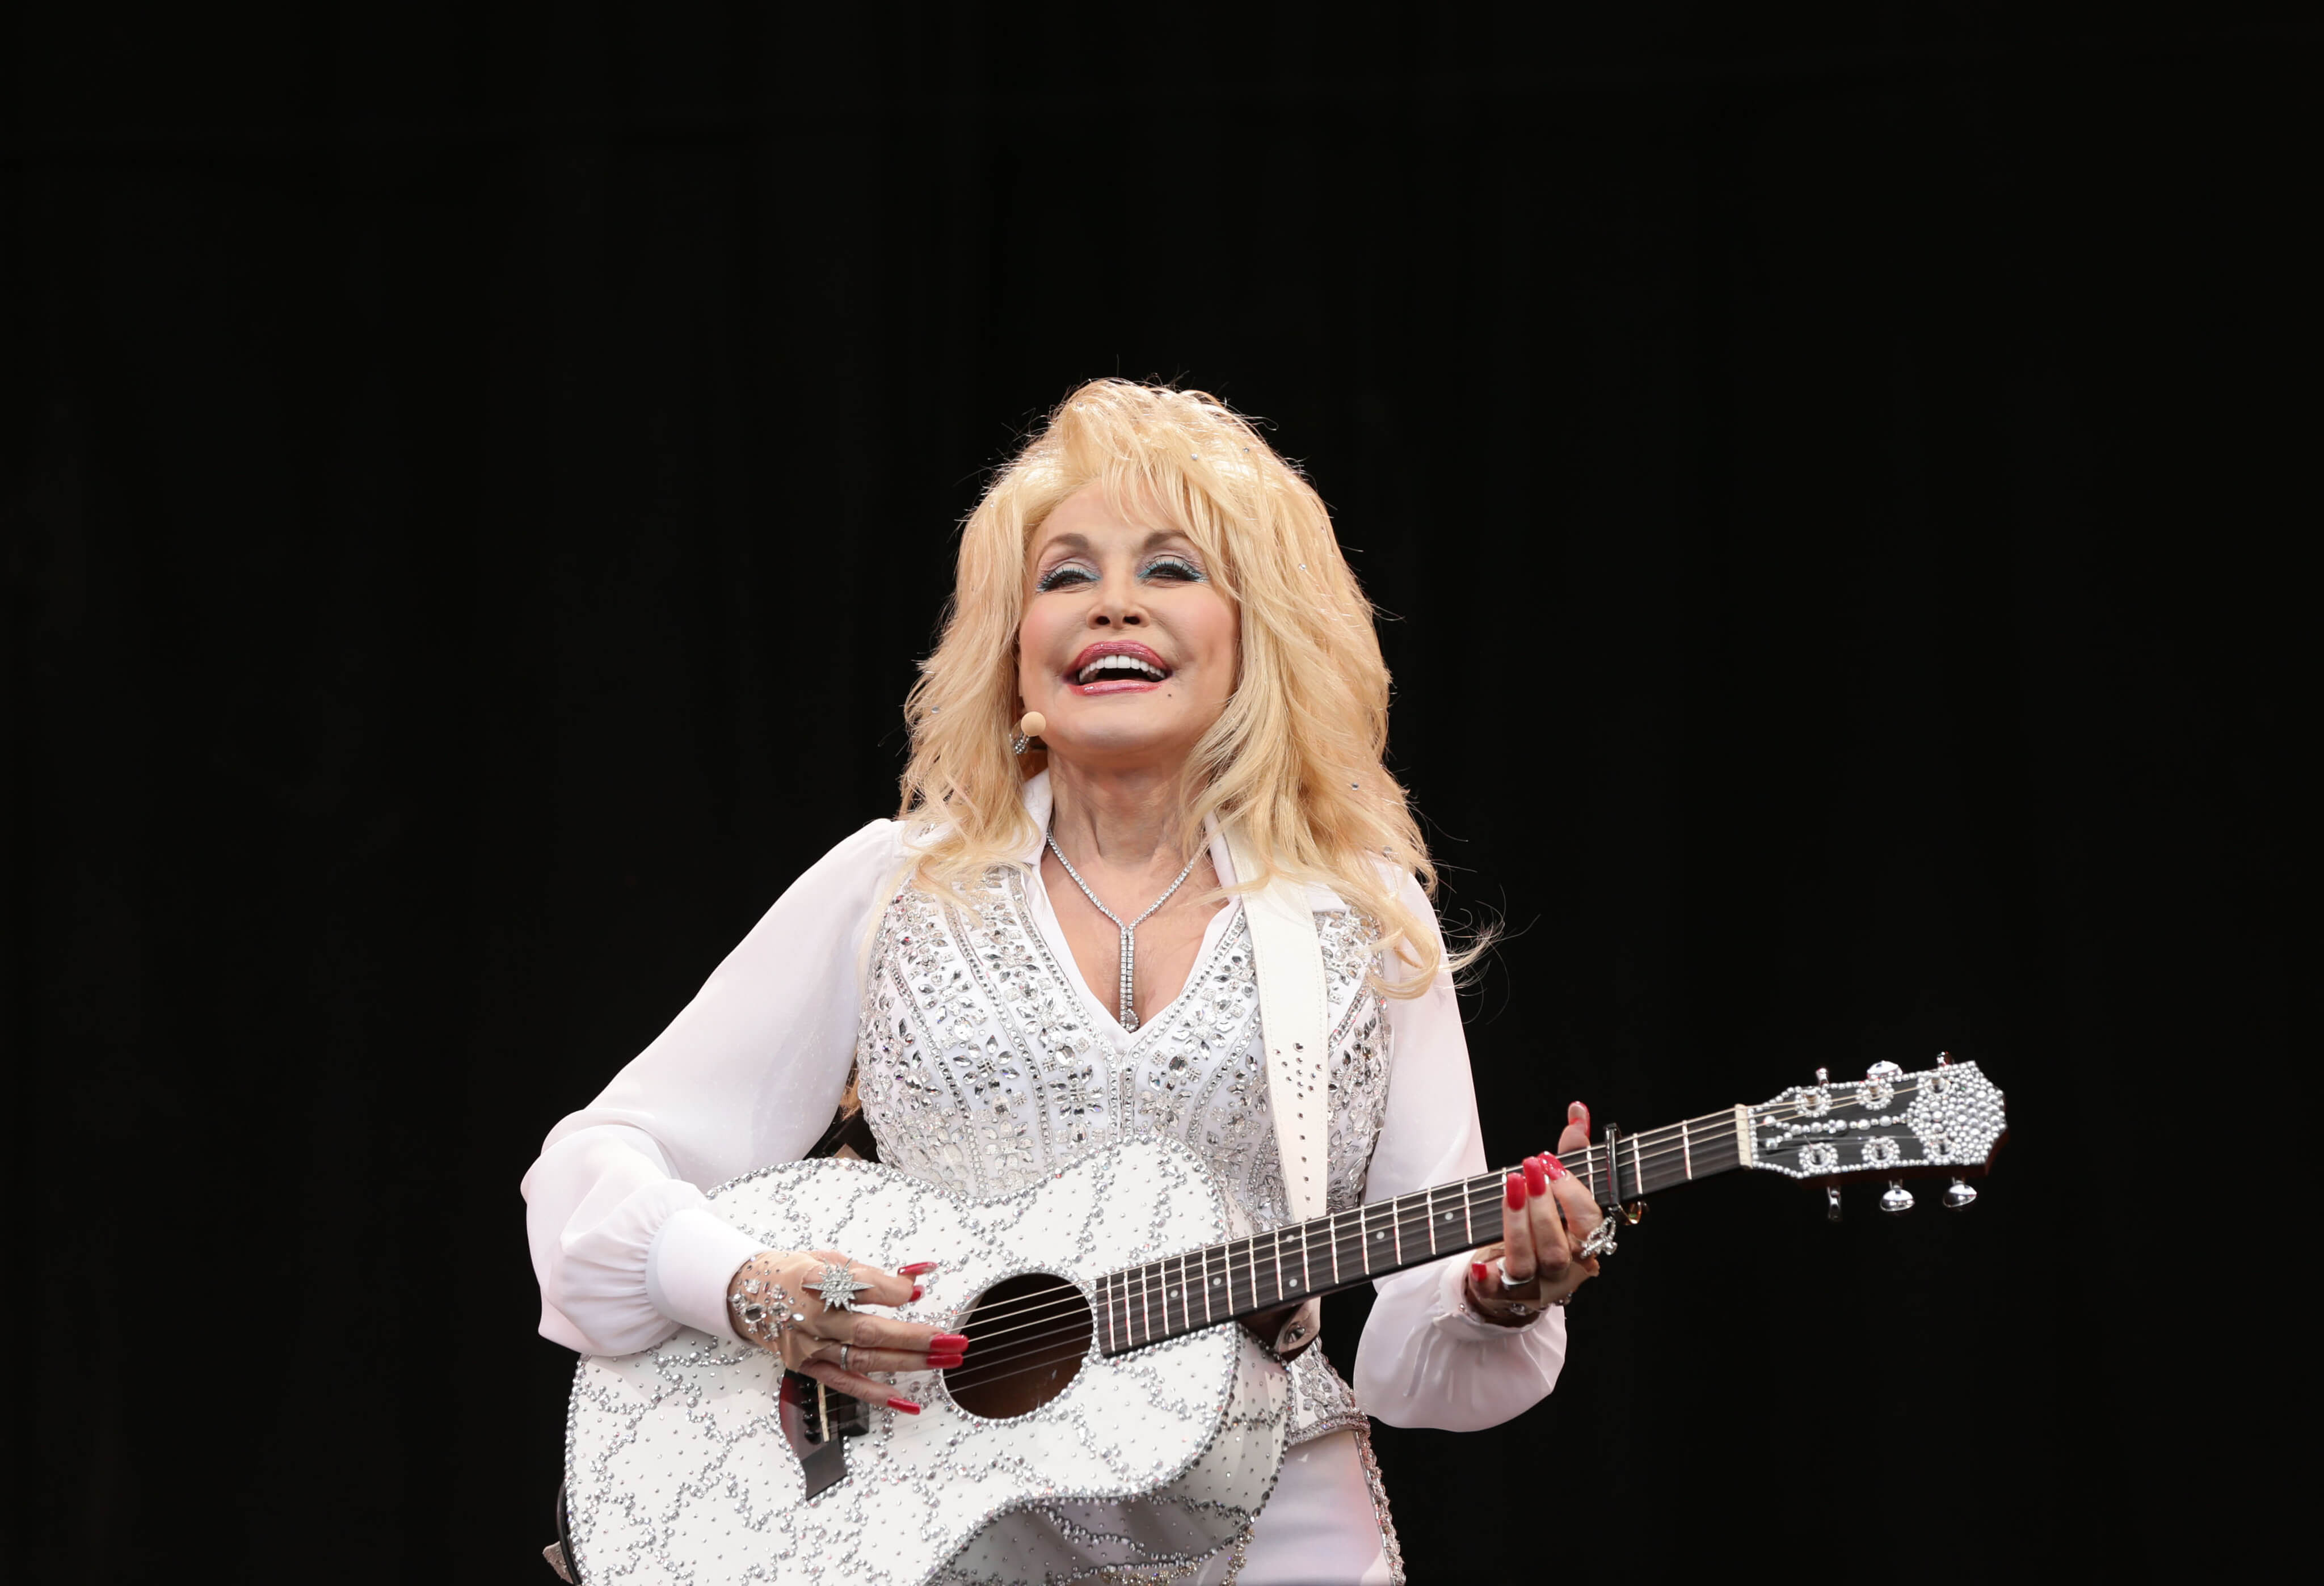 Dolly Parton on stage with a white guitar.